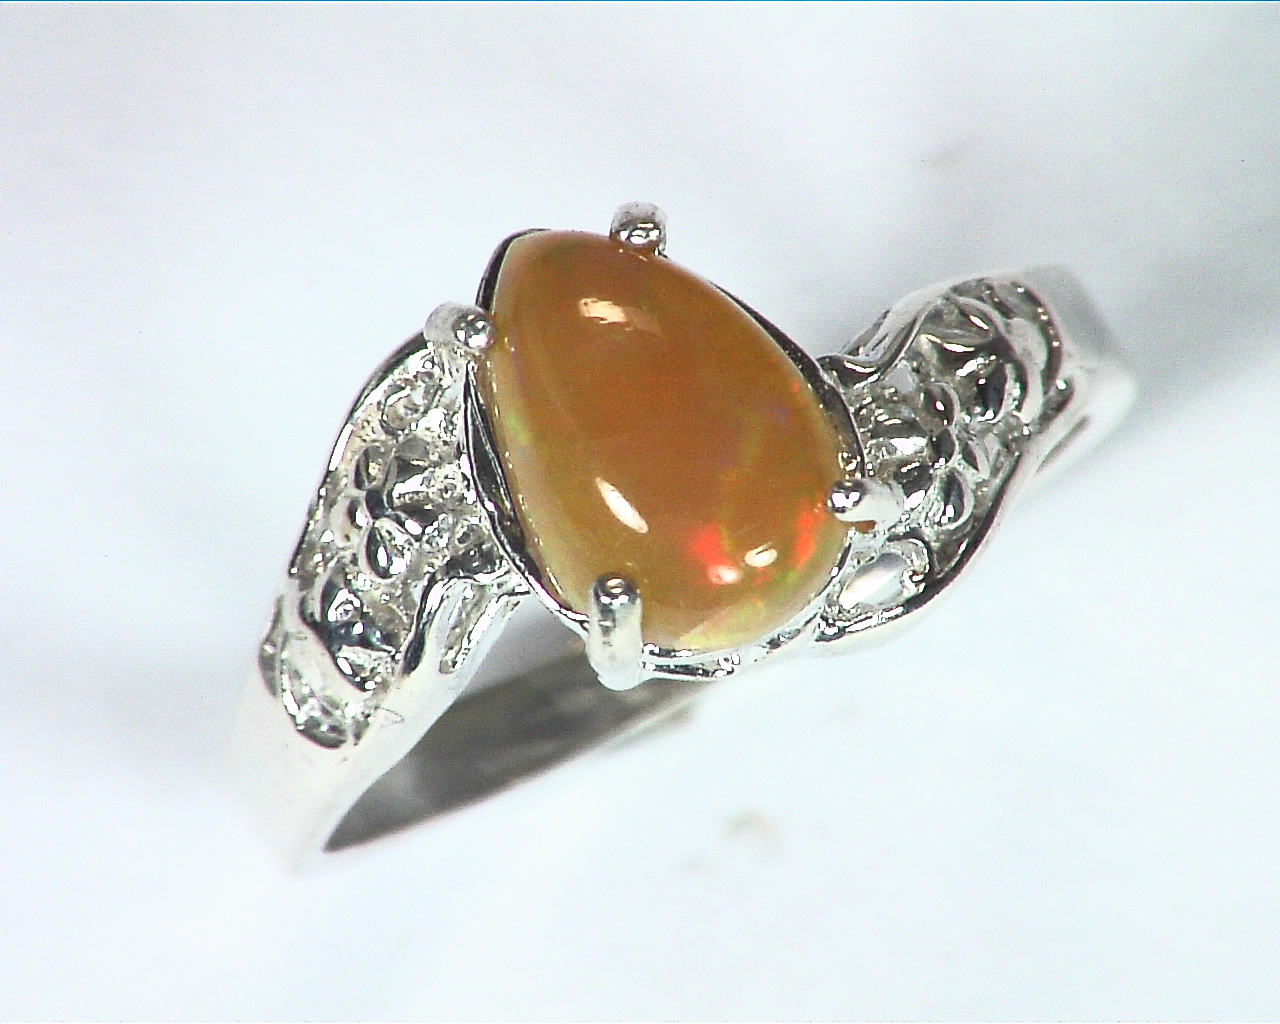 Opal (Mexican) Genuine Gemstone in Sterling silver Ring RSS,600